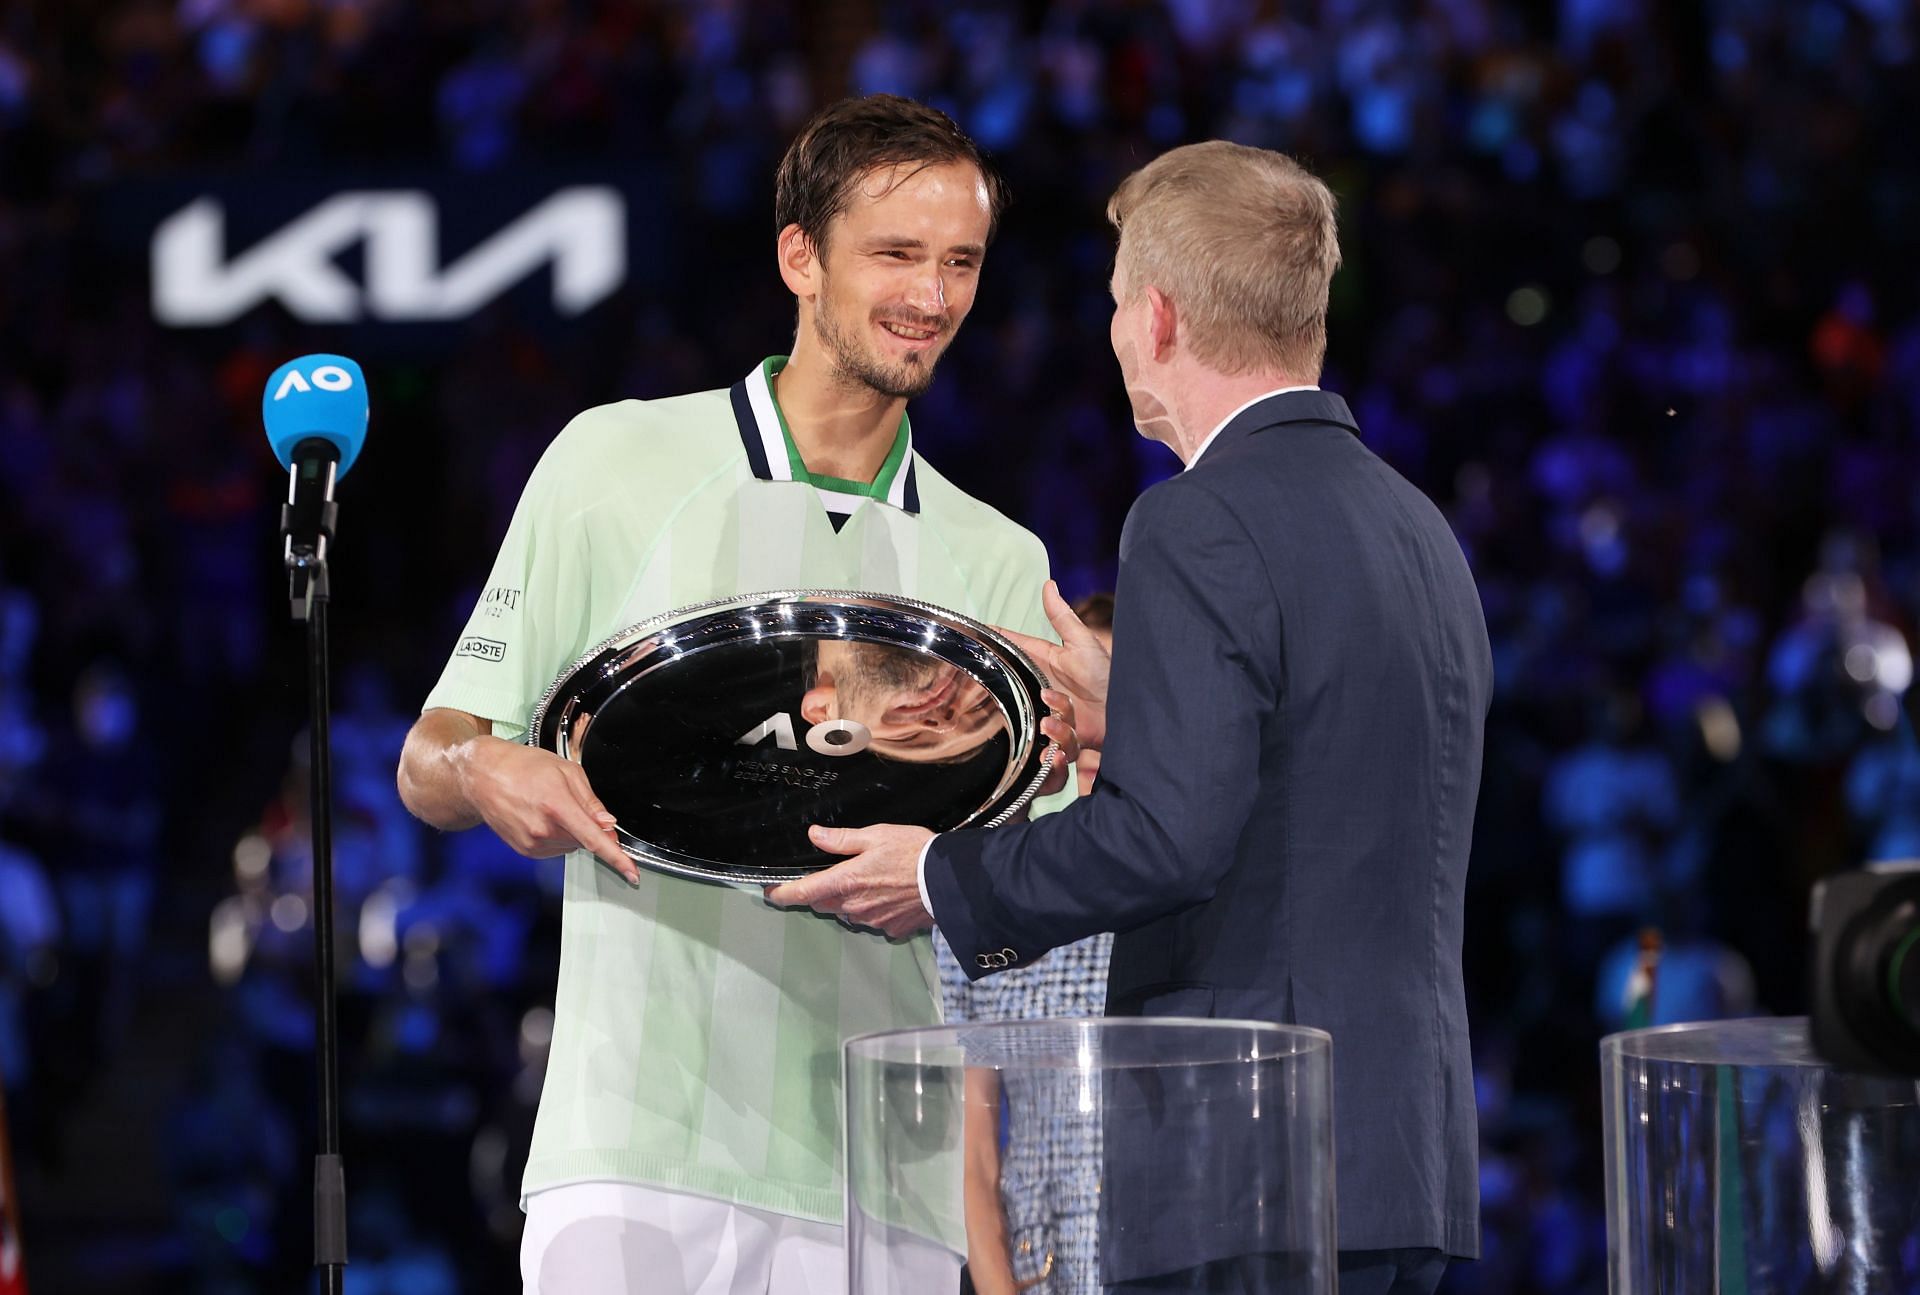 Daniil Medvedev reached his fourth Grand Slam final at the Australian Open